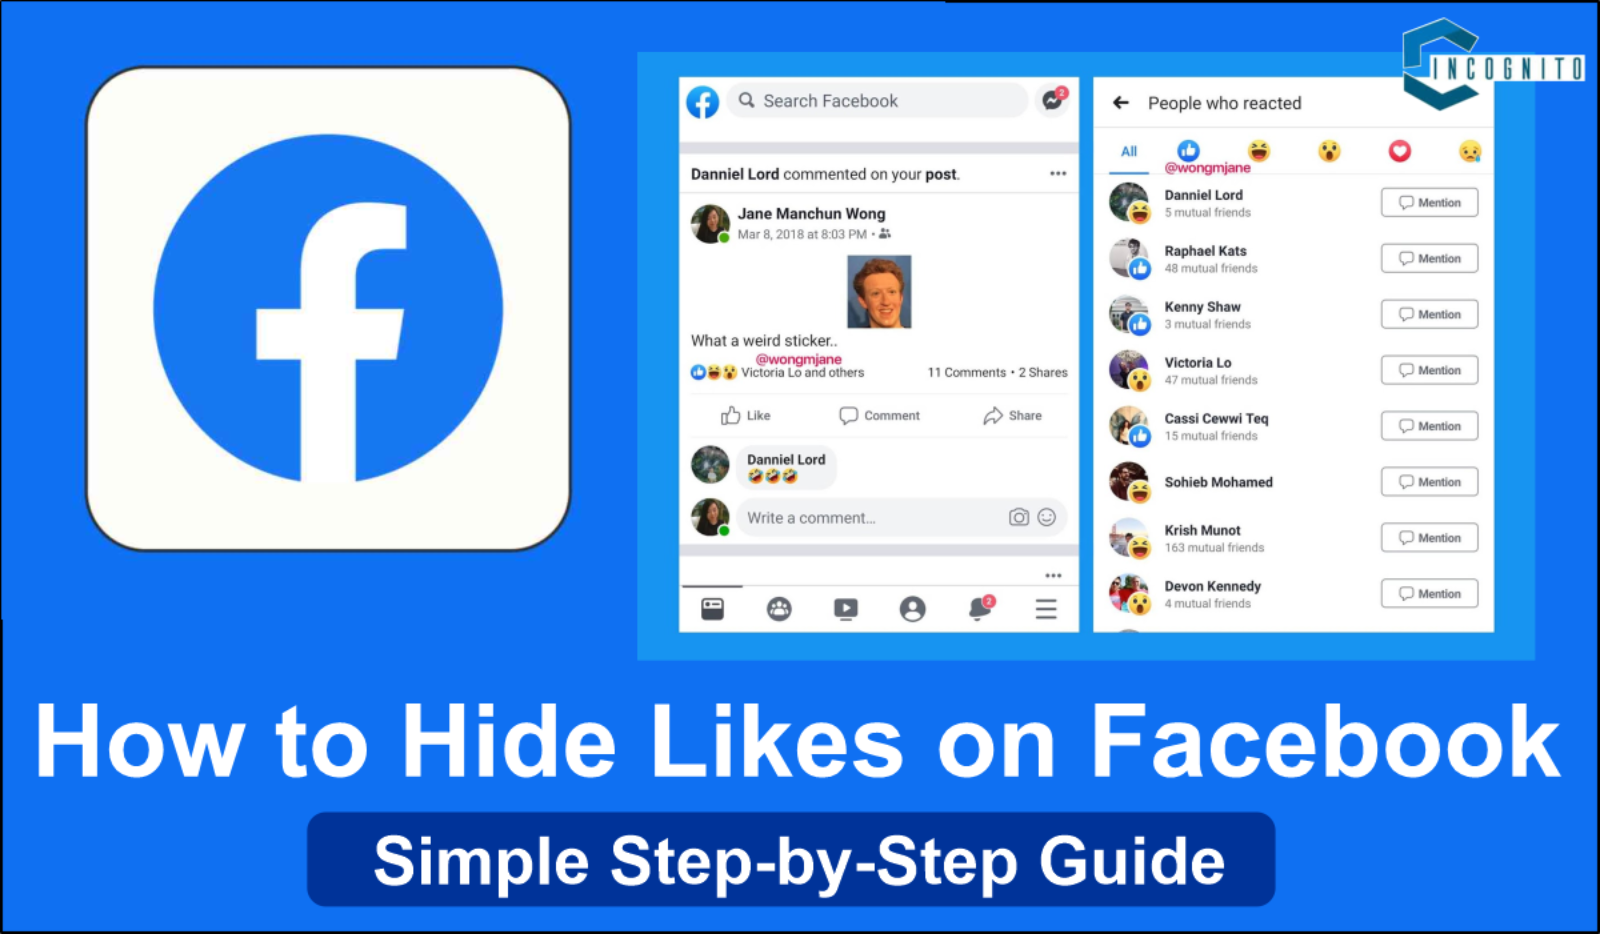 How to Hide Likes on Facebook ~ A Simple Step-by-Step Guide